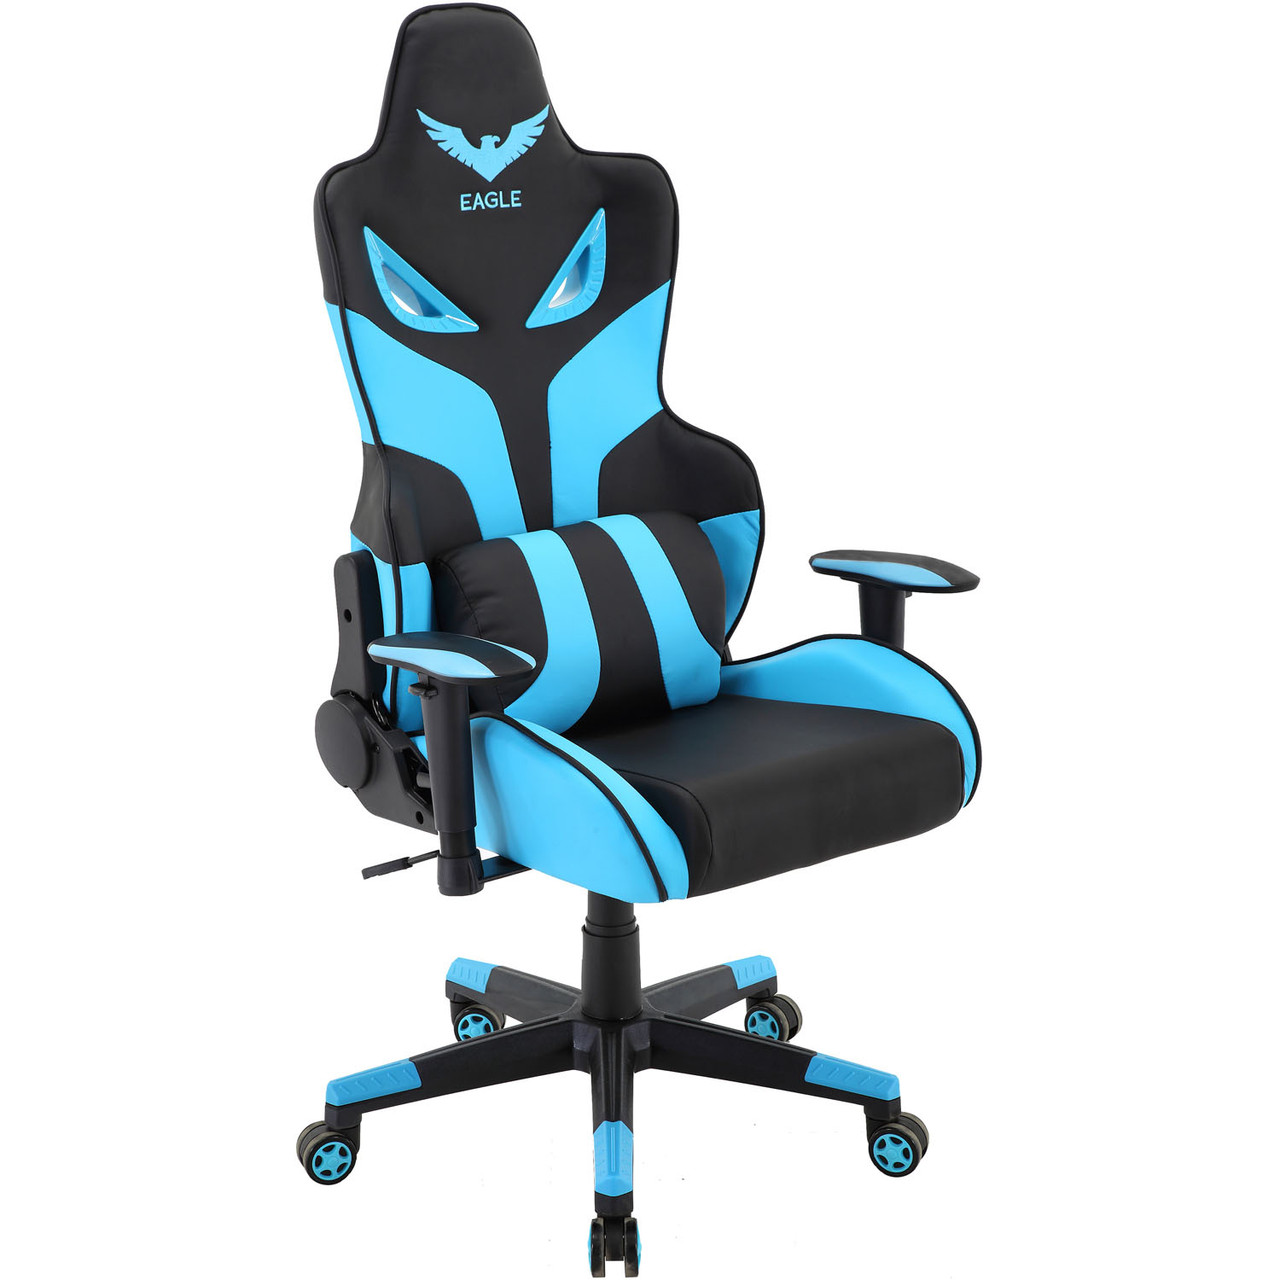 Commando Ergonomic Gaming with Adjustable Gas Lift Seating & Support